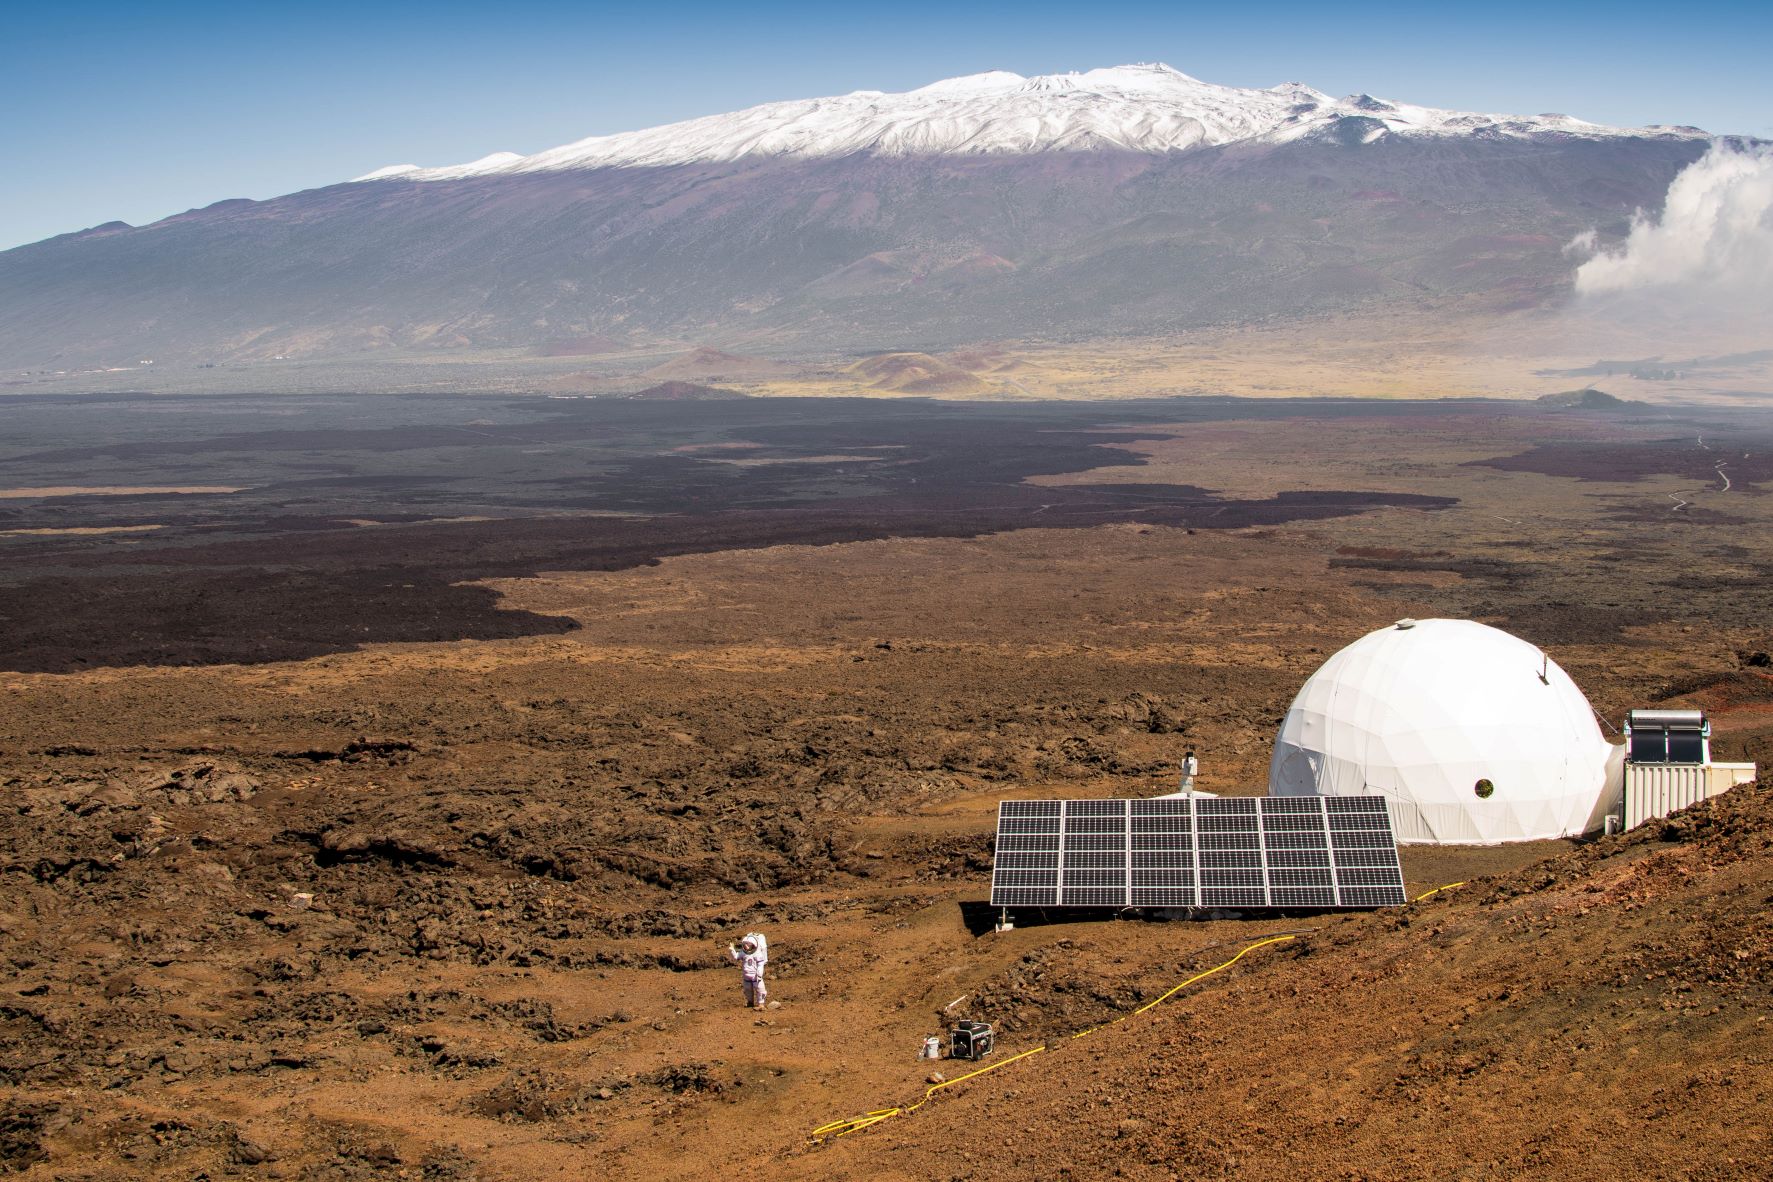 A view of the the NASA-funded Hawaii Space Exploration Analog and Simulation, or HI-SEAS, facility. In the foreground is a crew member simulating a walk on a planetary surface. In the background is Mauna Loa.